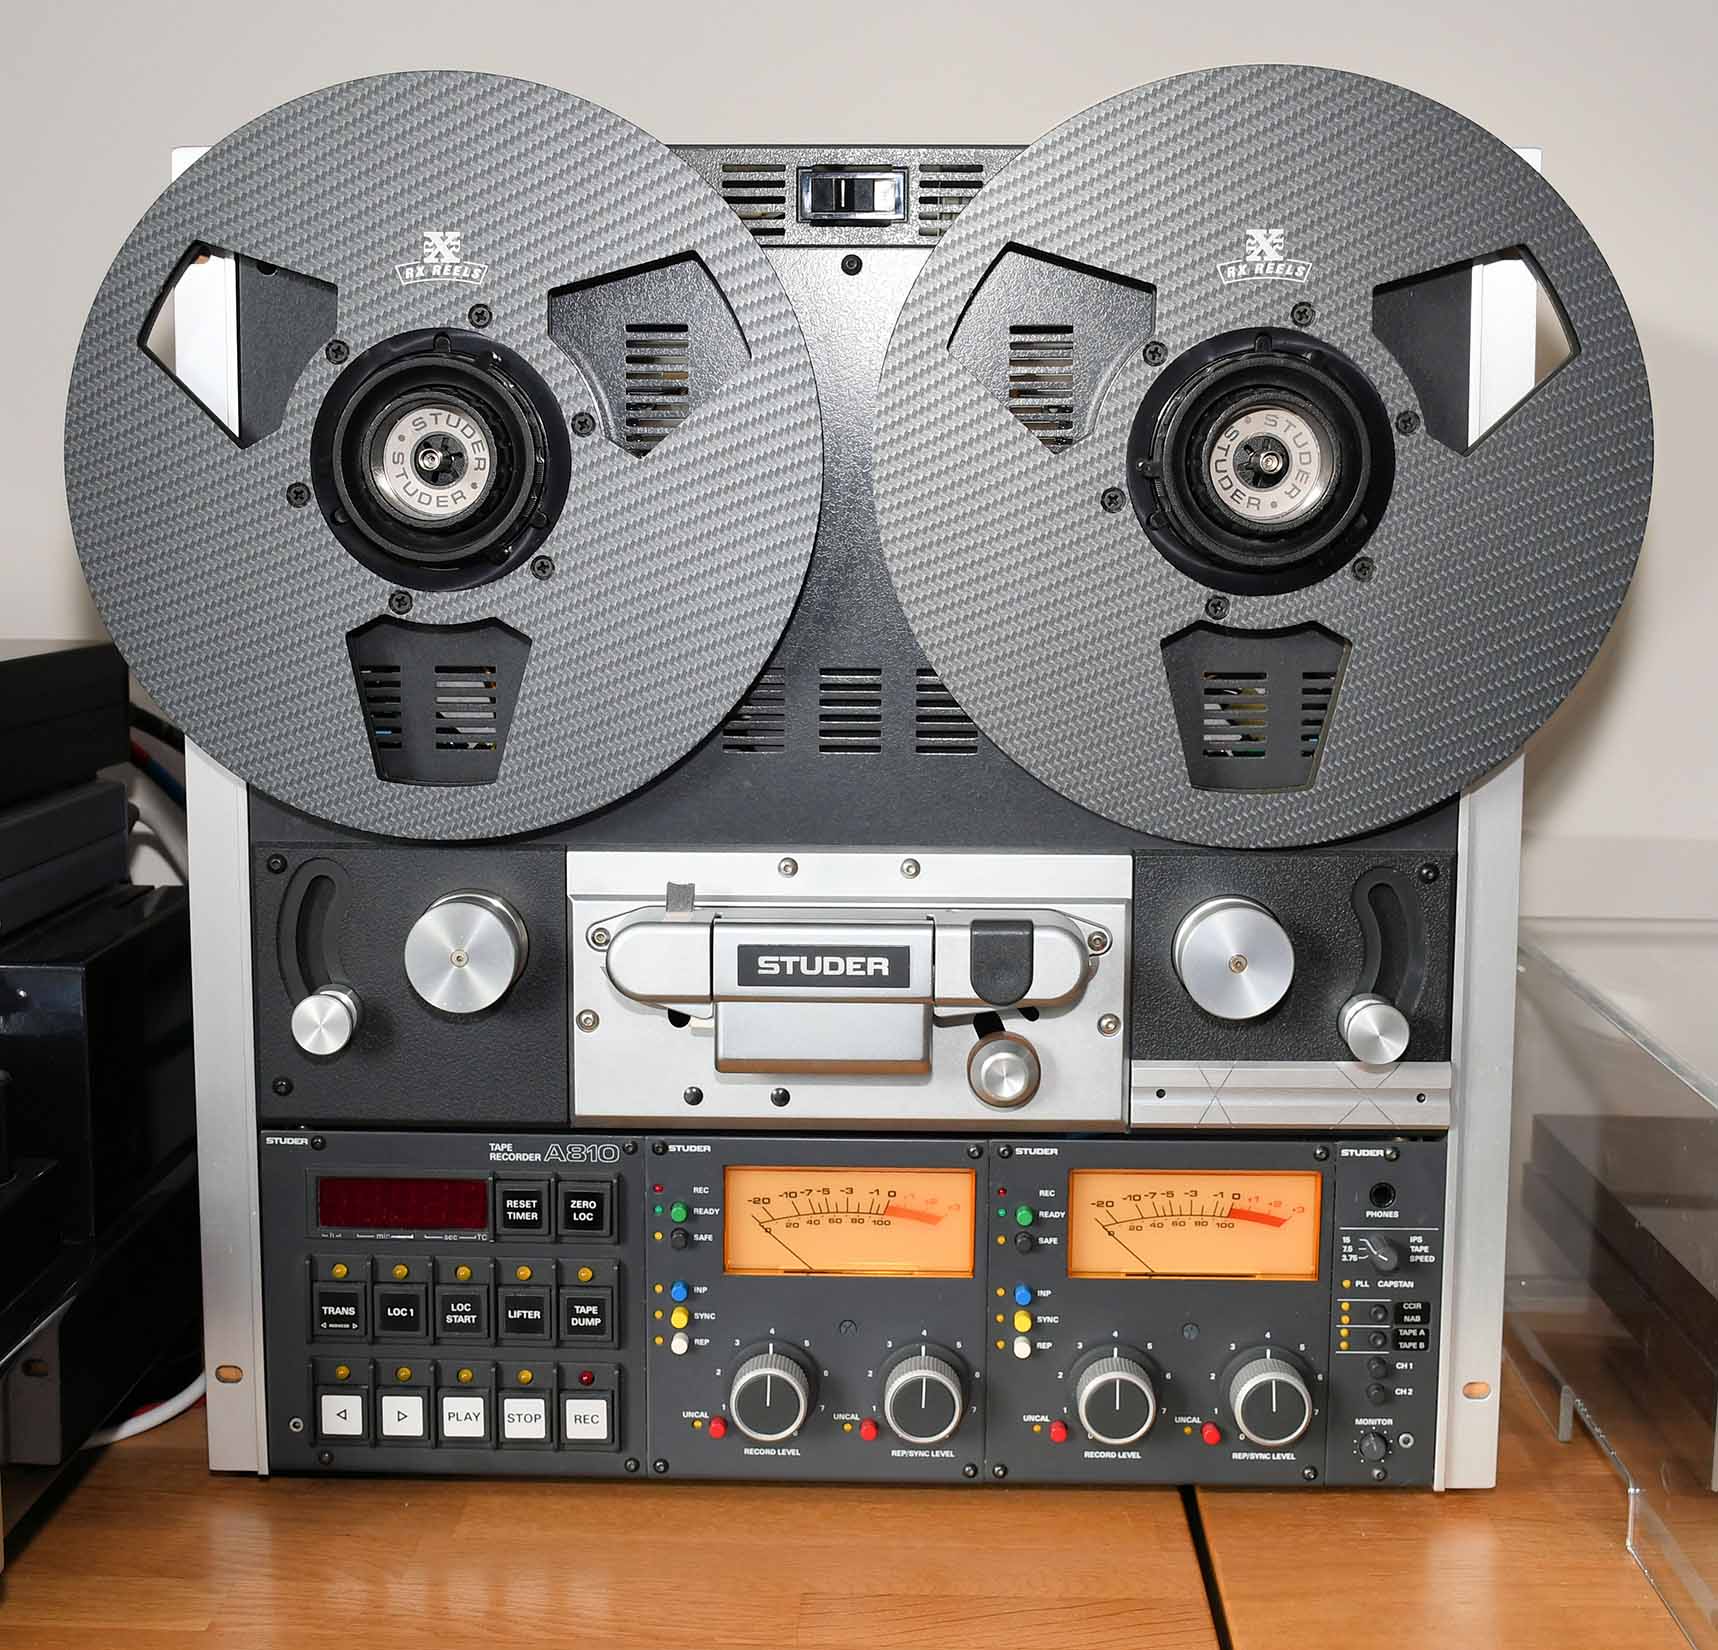 Getting Started With Reel To Reel Tape Players - RX Reels